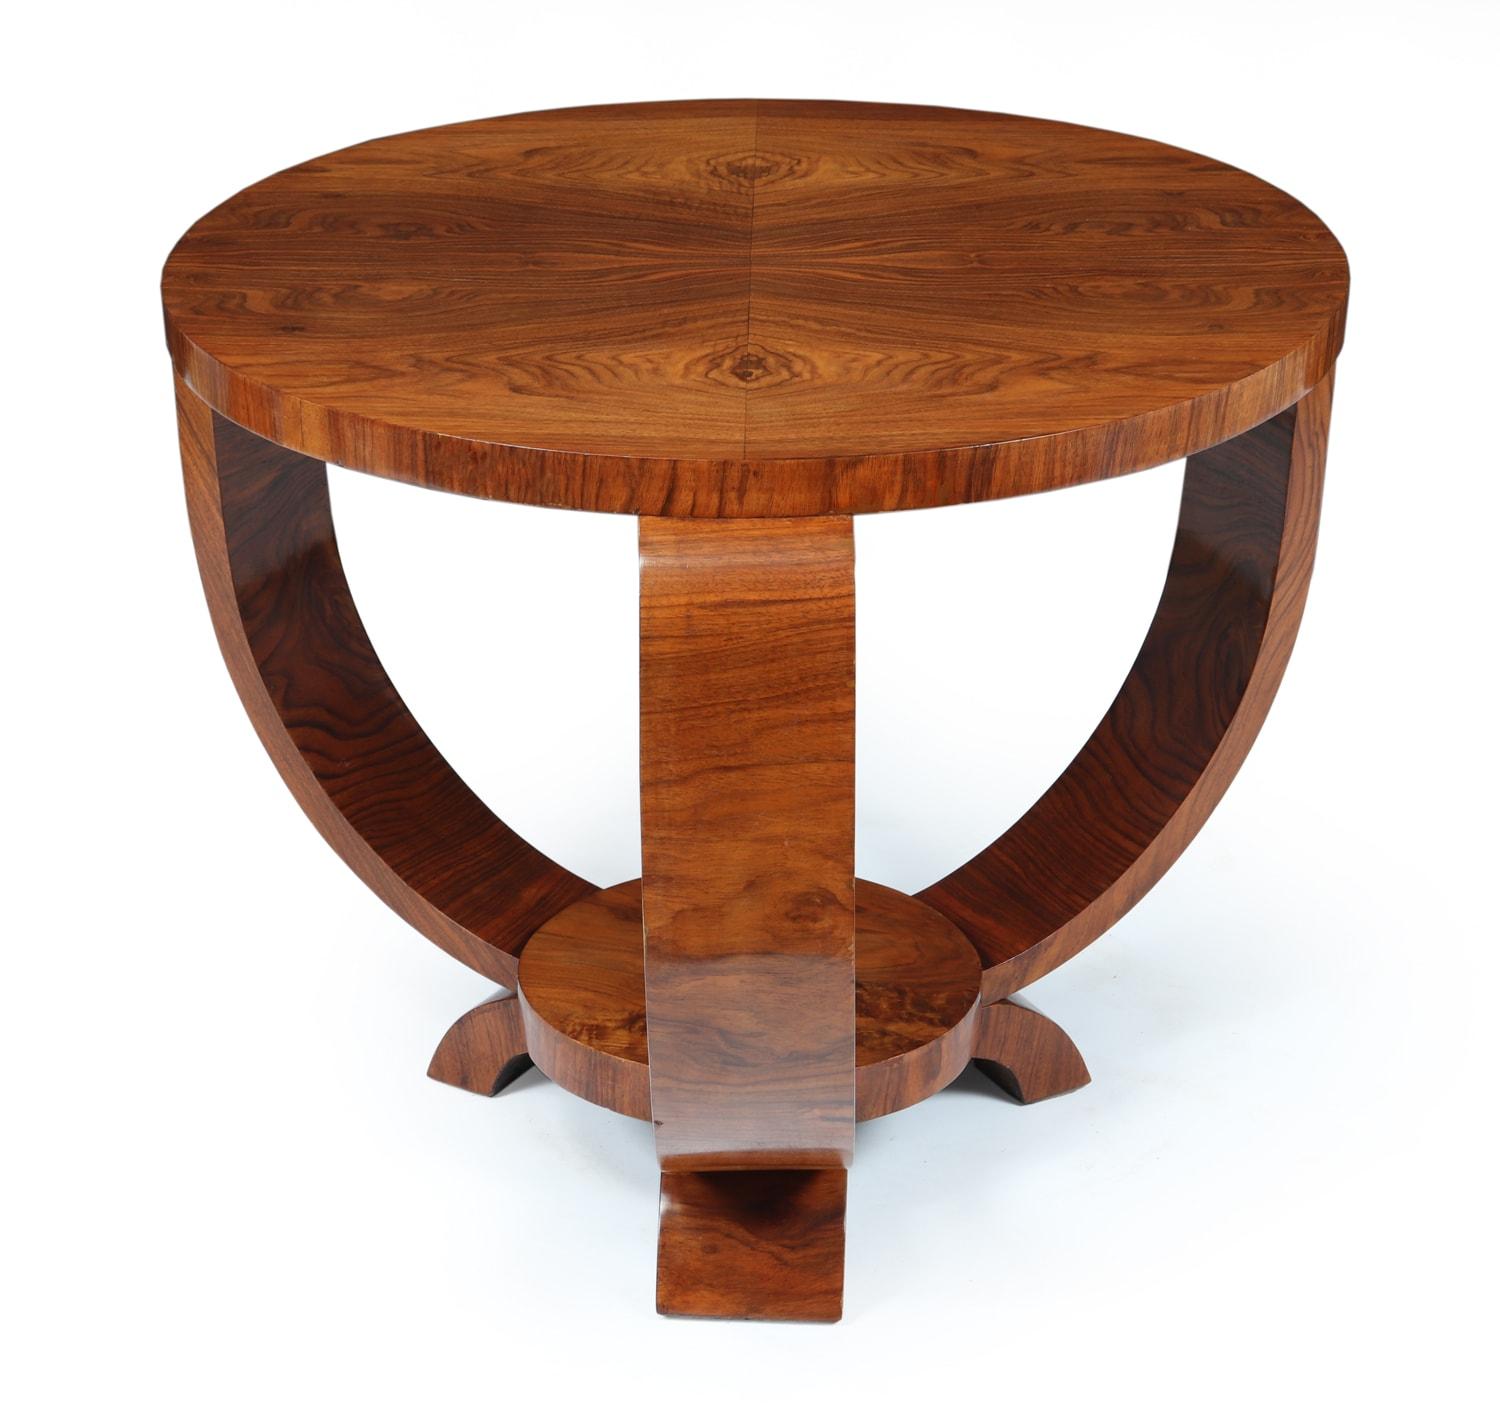 French Art Deco walnut table, 1930

A circular walnut center coffee table with three curved shaped uprights, lower tier shelf fully restored and French polished by hand
Age: 1930
Style: Art Deco
Material: Walnut
Origin : France
Condition: